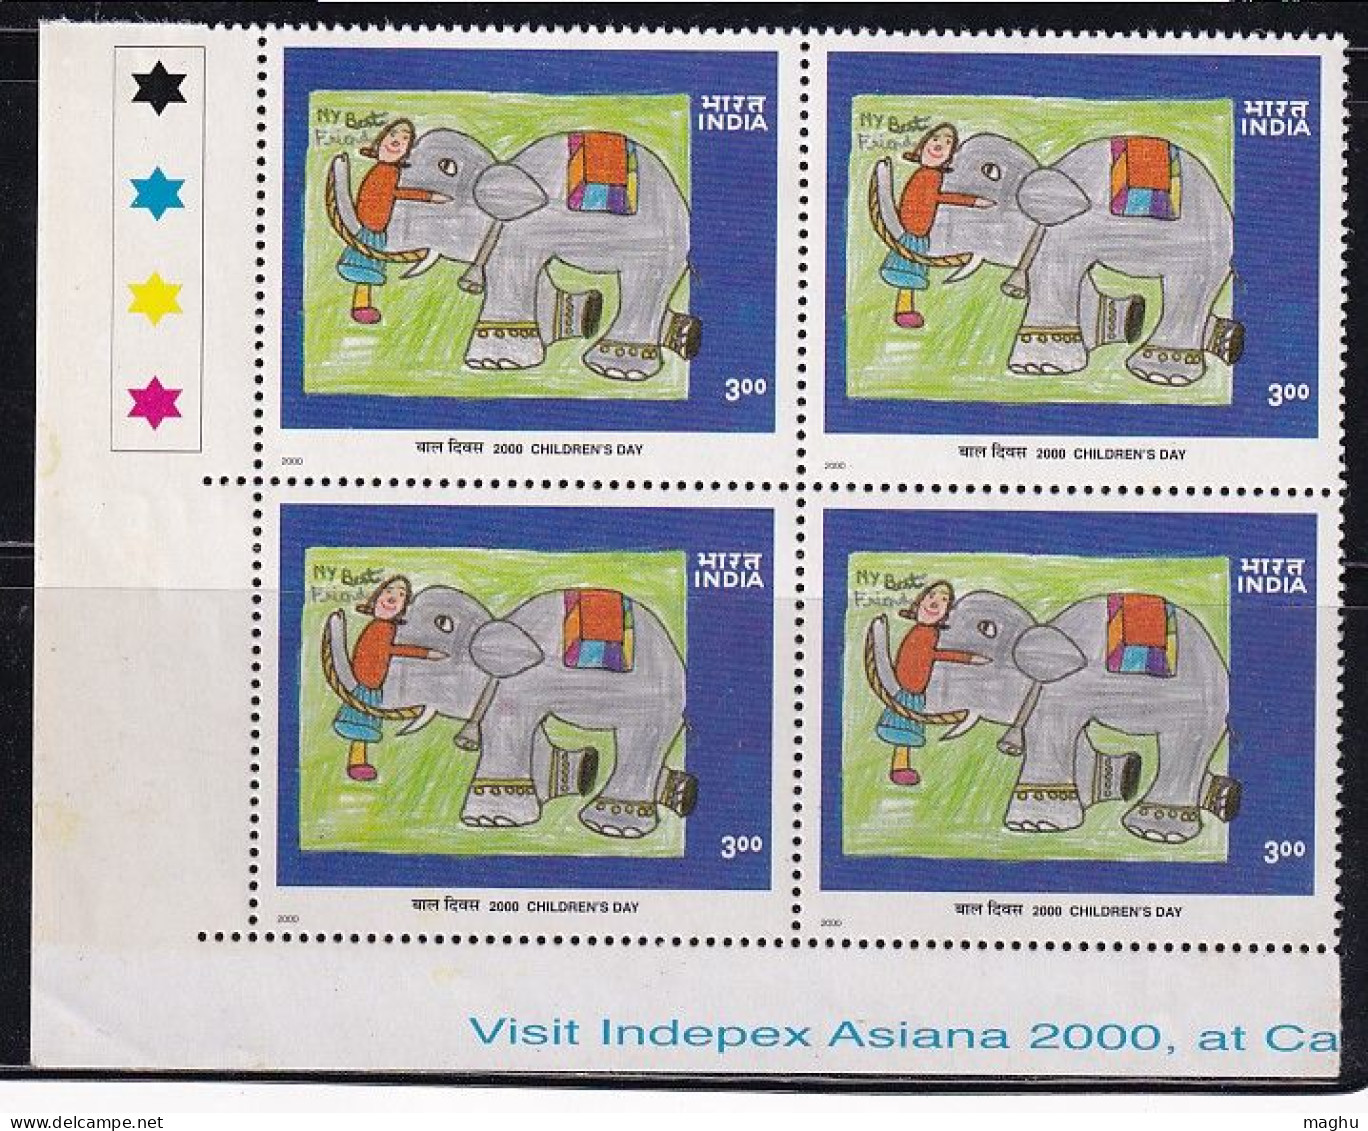 T/L Block Of 4,India MNH 2000,  Childrens Day, Art Painting 'My Best Friend', Kinder Girl, Elephant, Animal, - Blocs-feuillets